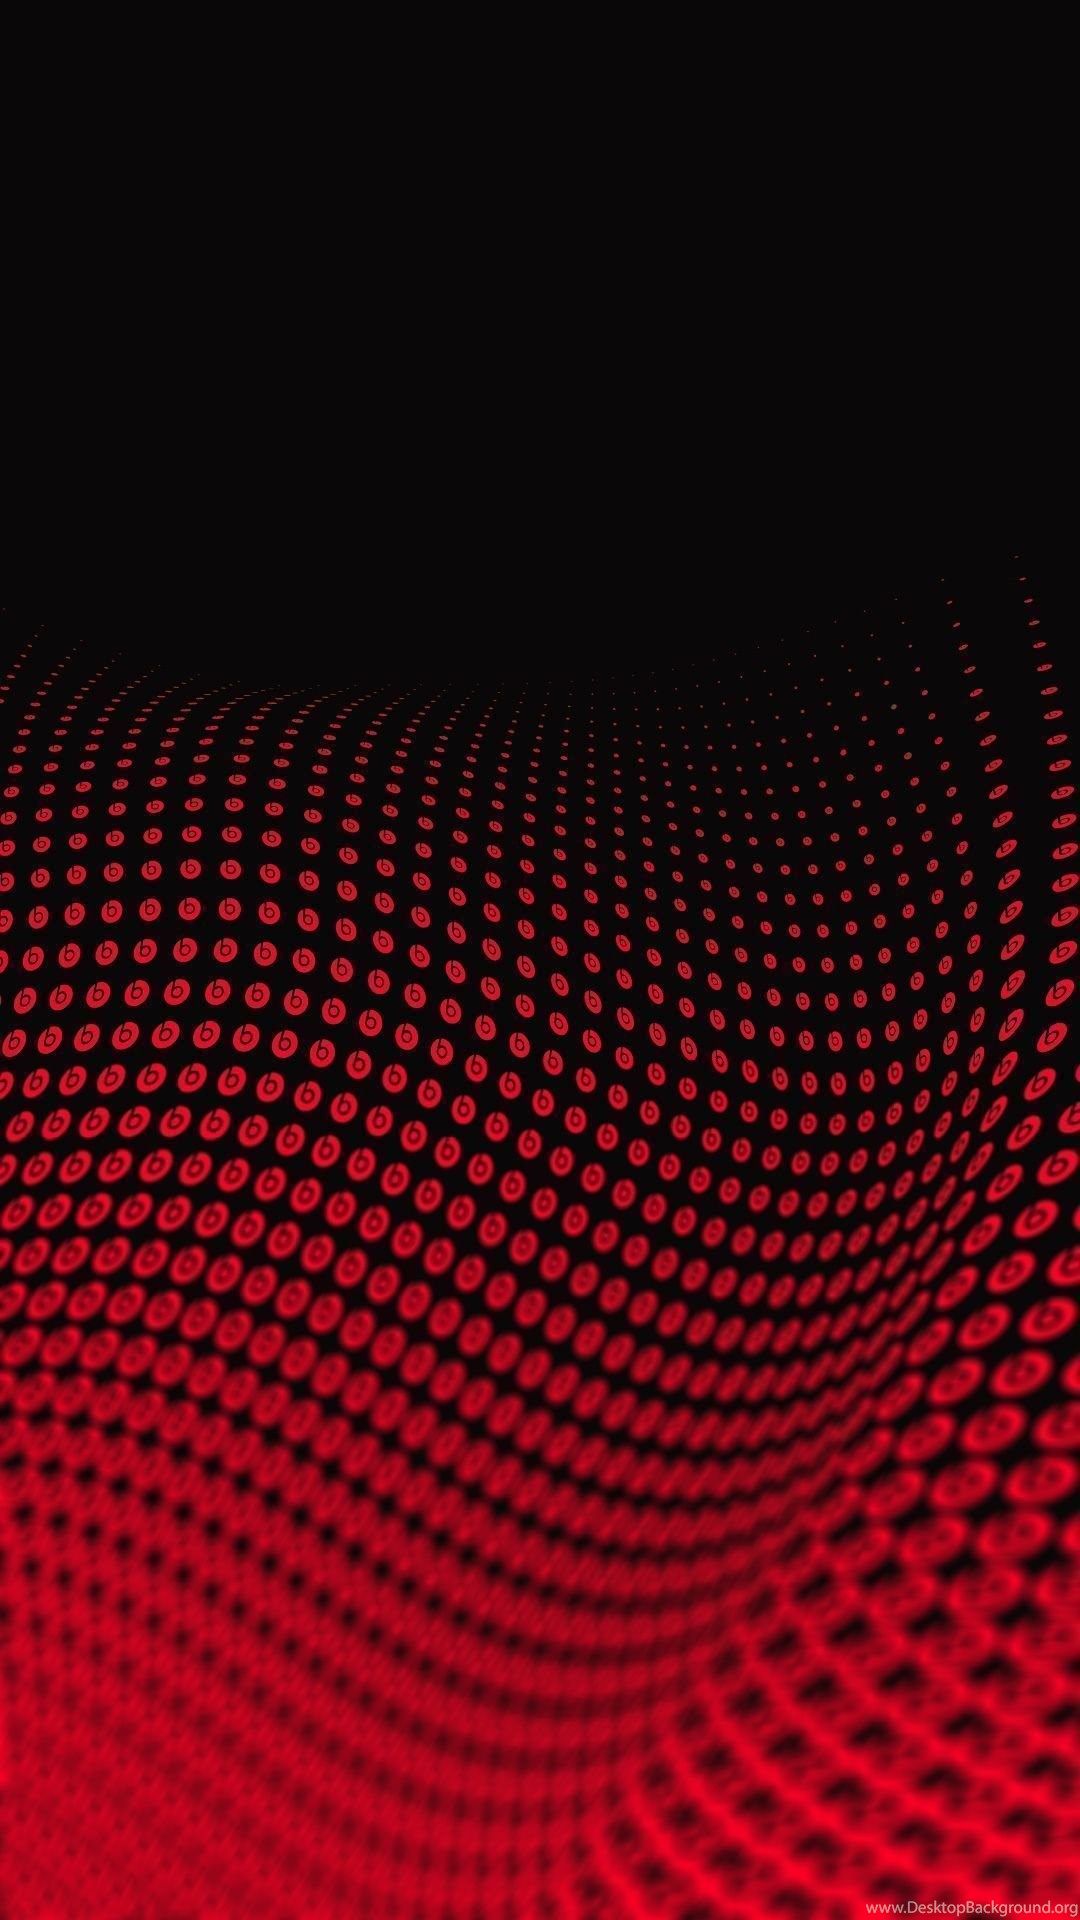 ZTE Nubia Wallpaper: Abstract Red Android Wallpaper Mobile Android. Desktop Background